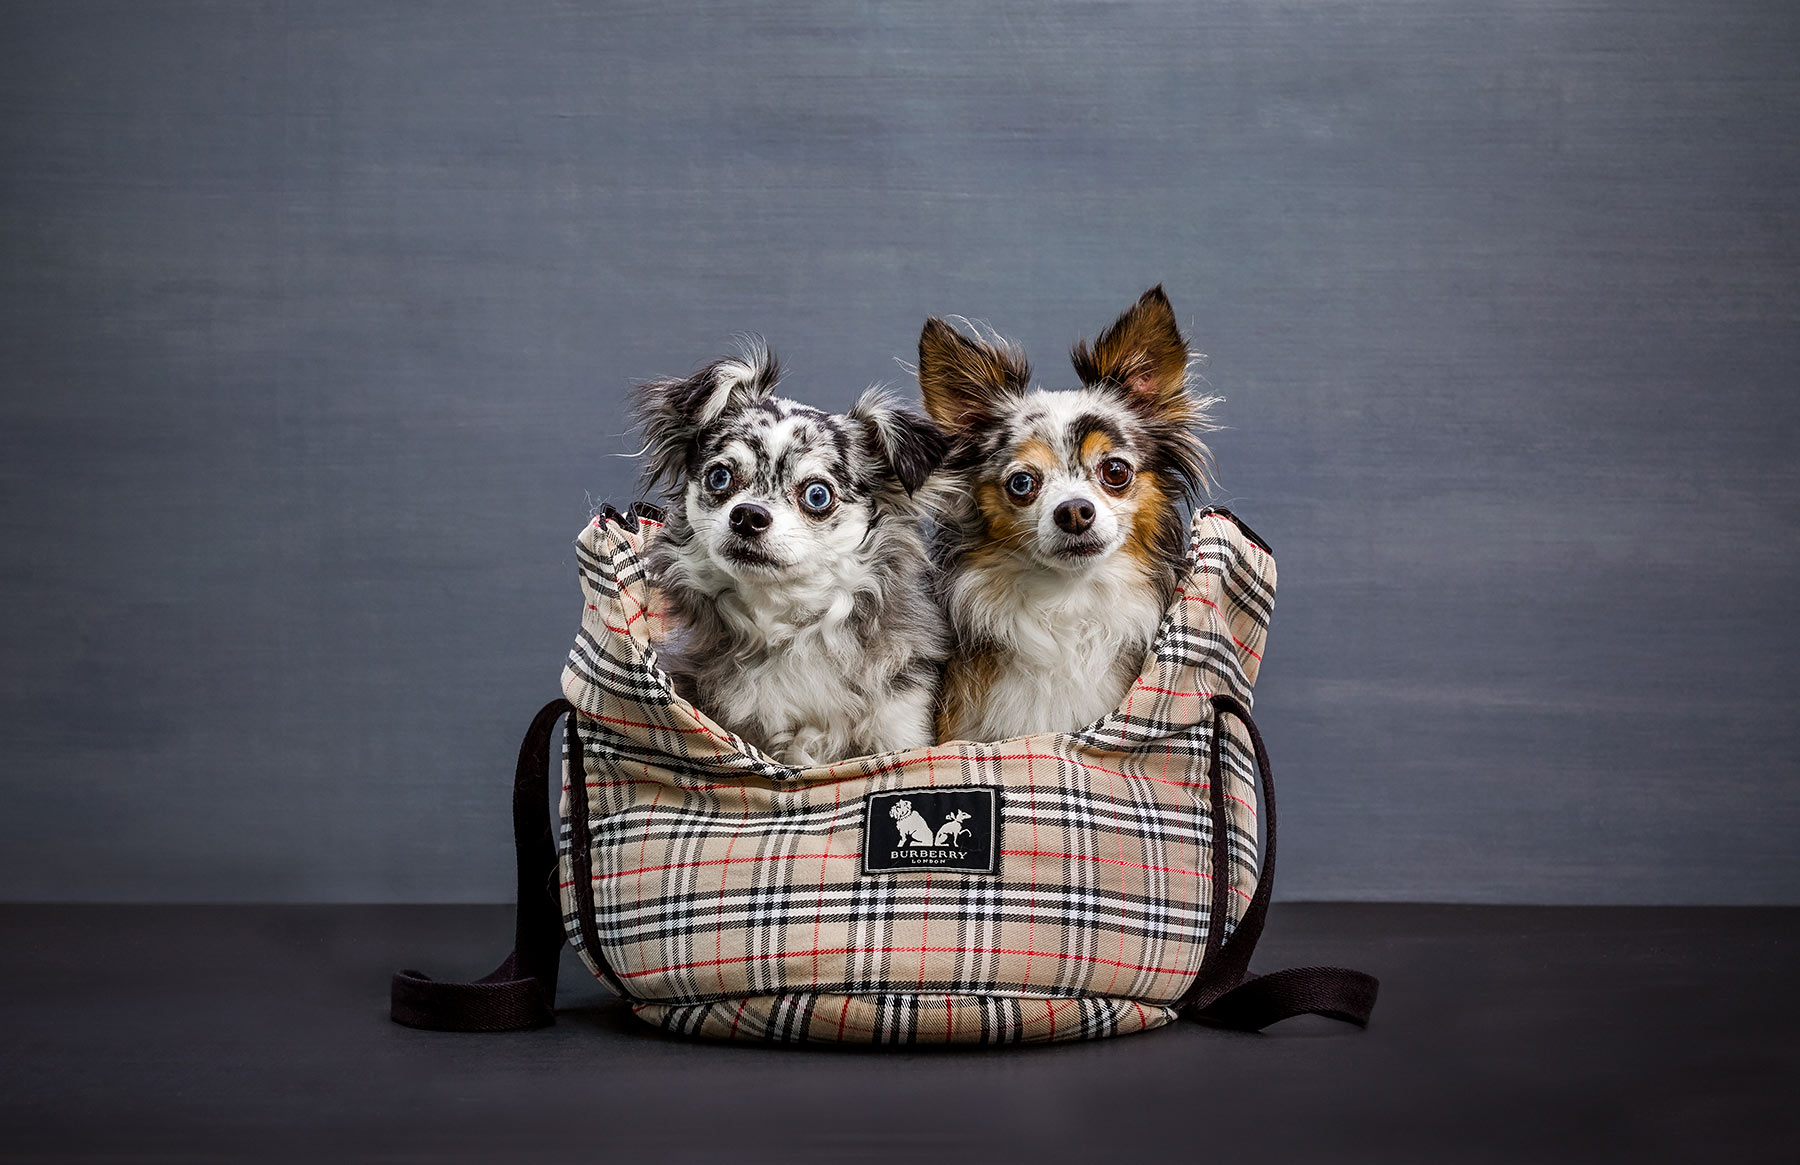 A-studio-portrait-of-two-fluffy-dogs-sharing-a-dog-bed-against-a-black-background